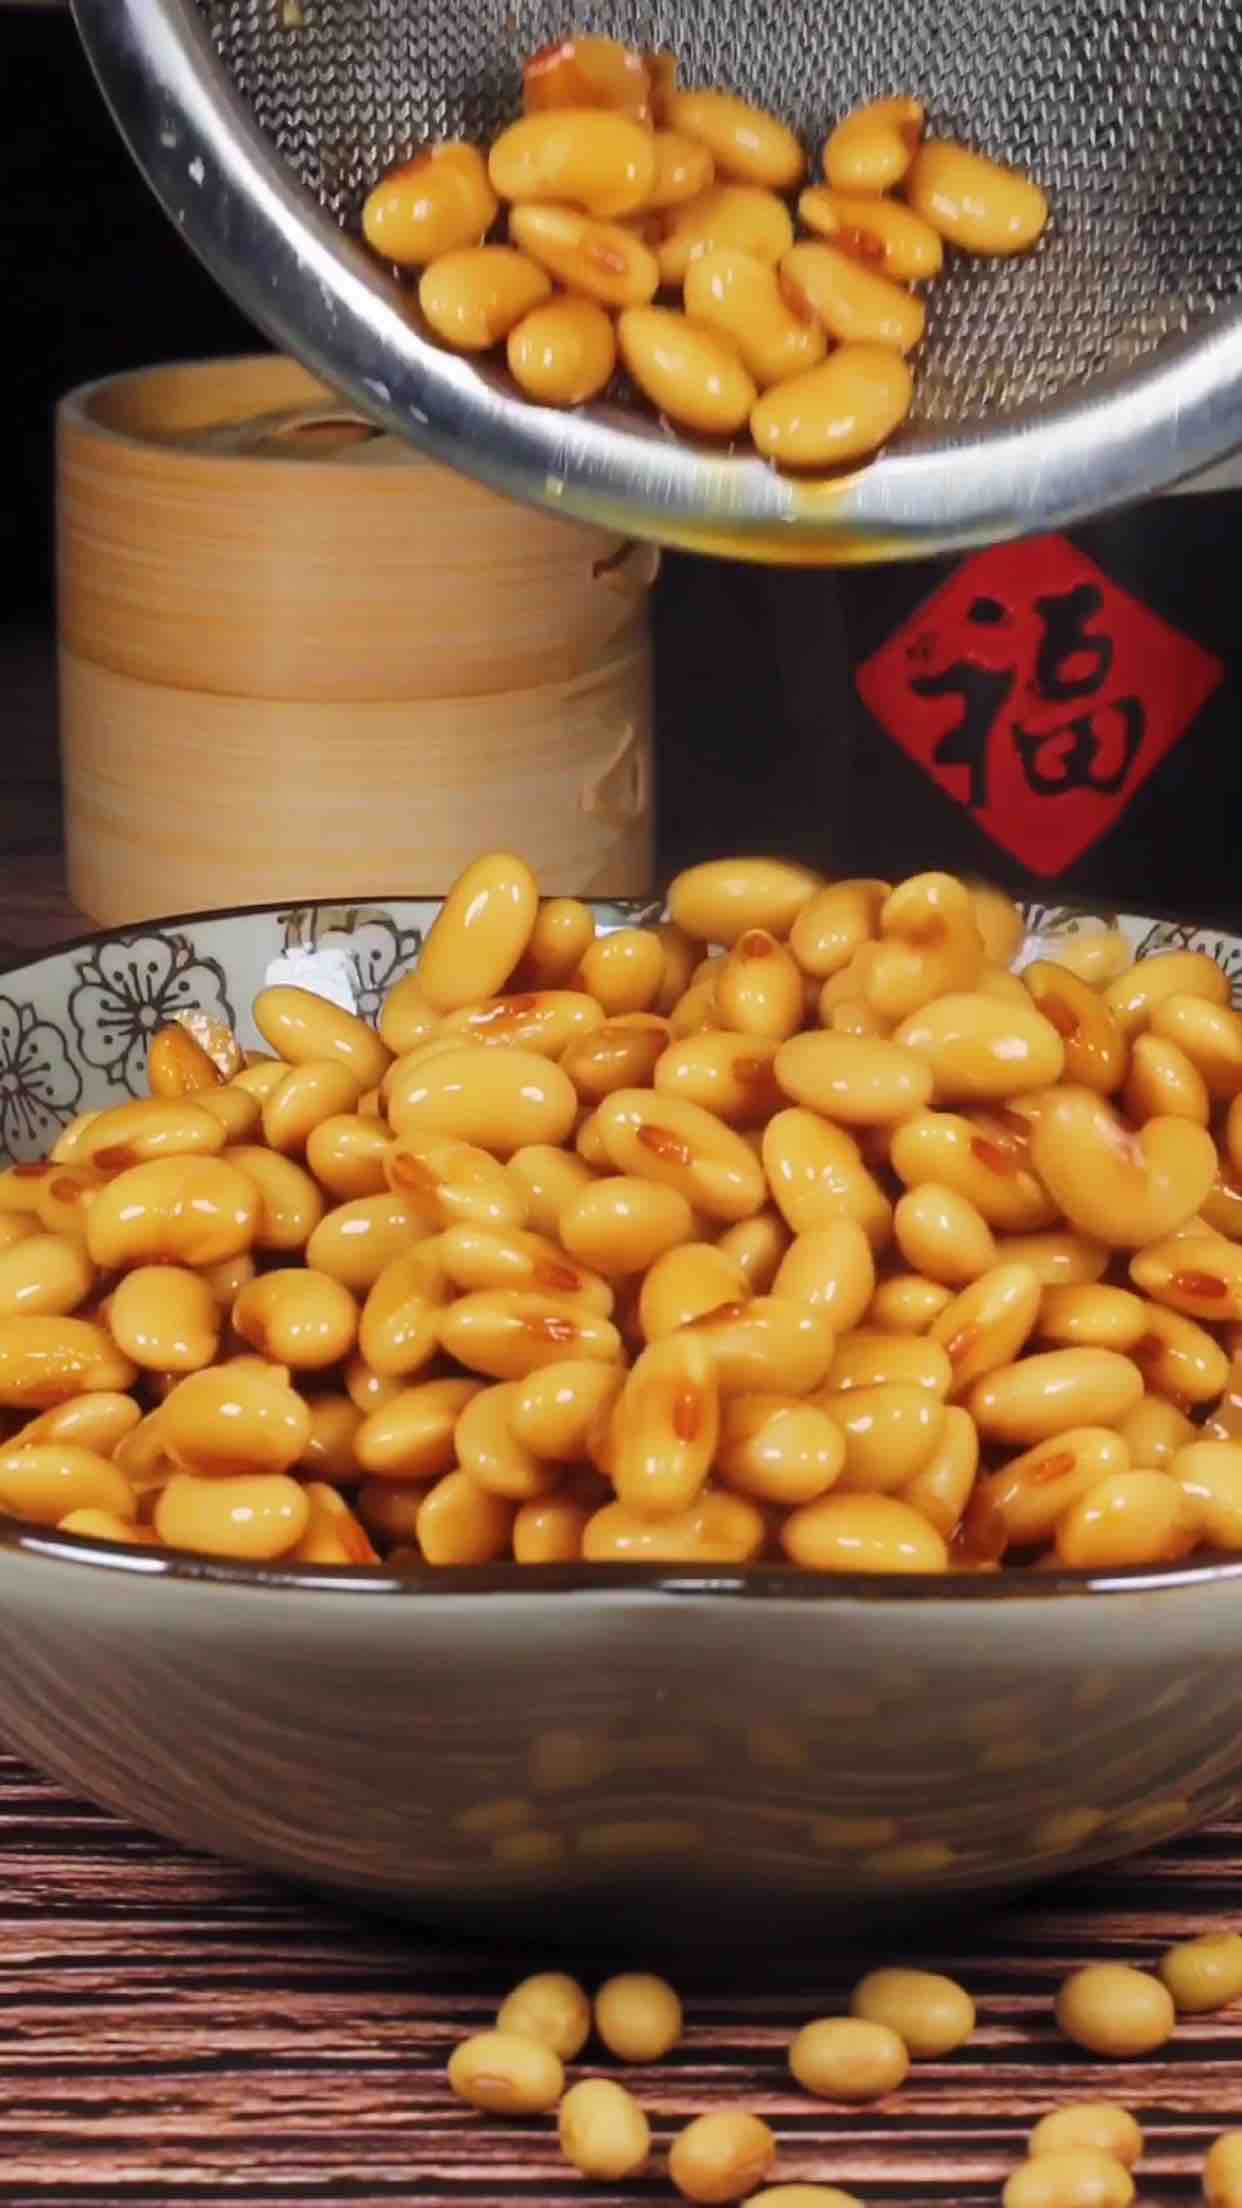 Spicy Soy Dish recipe